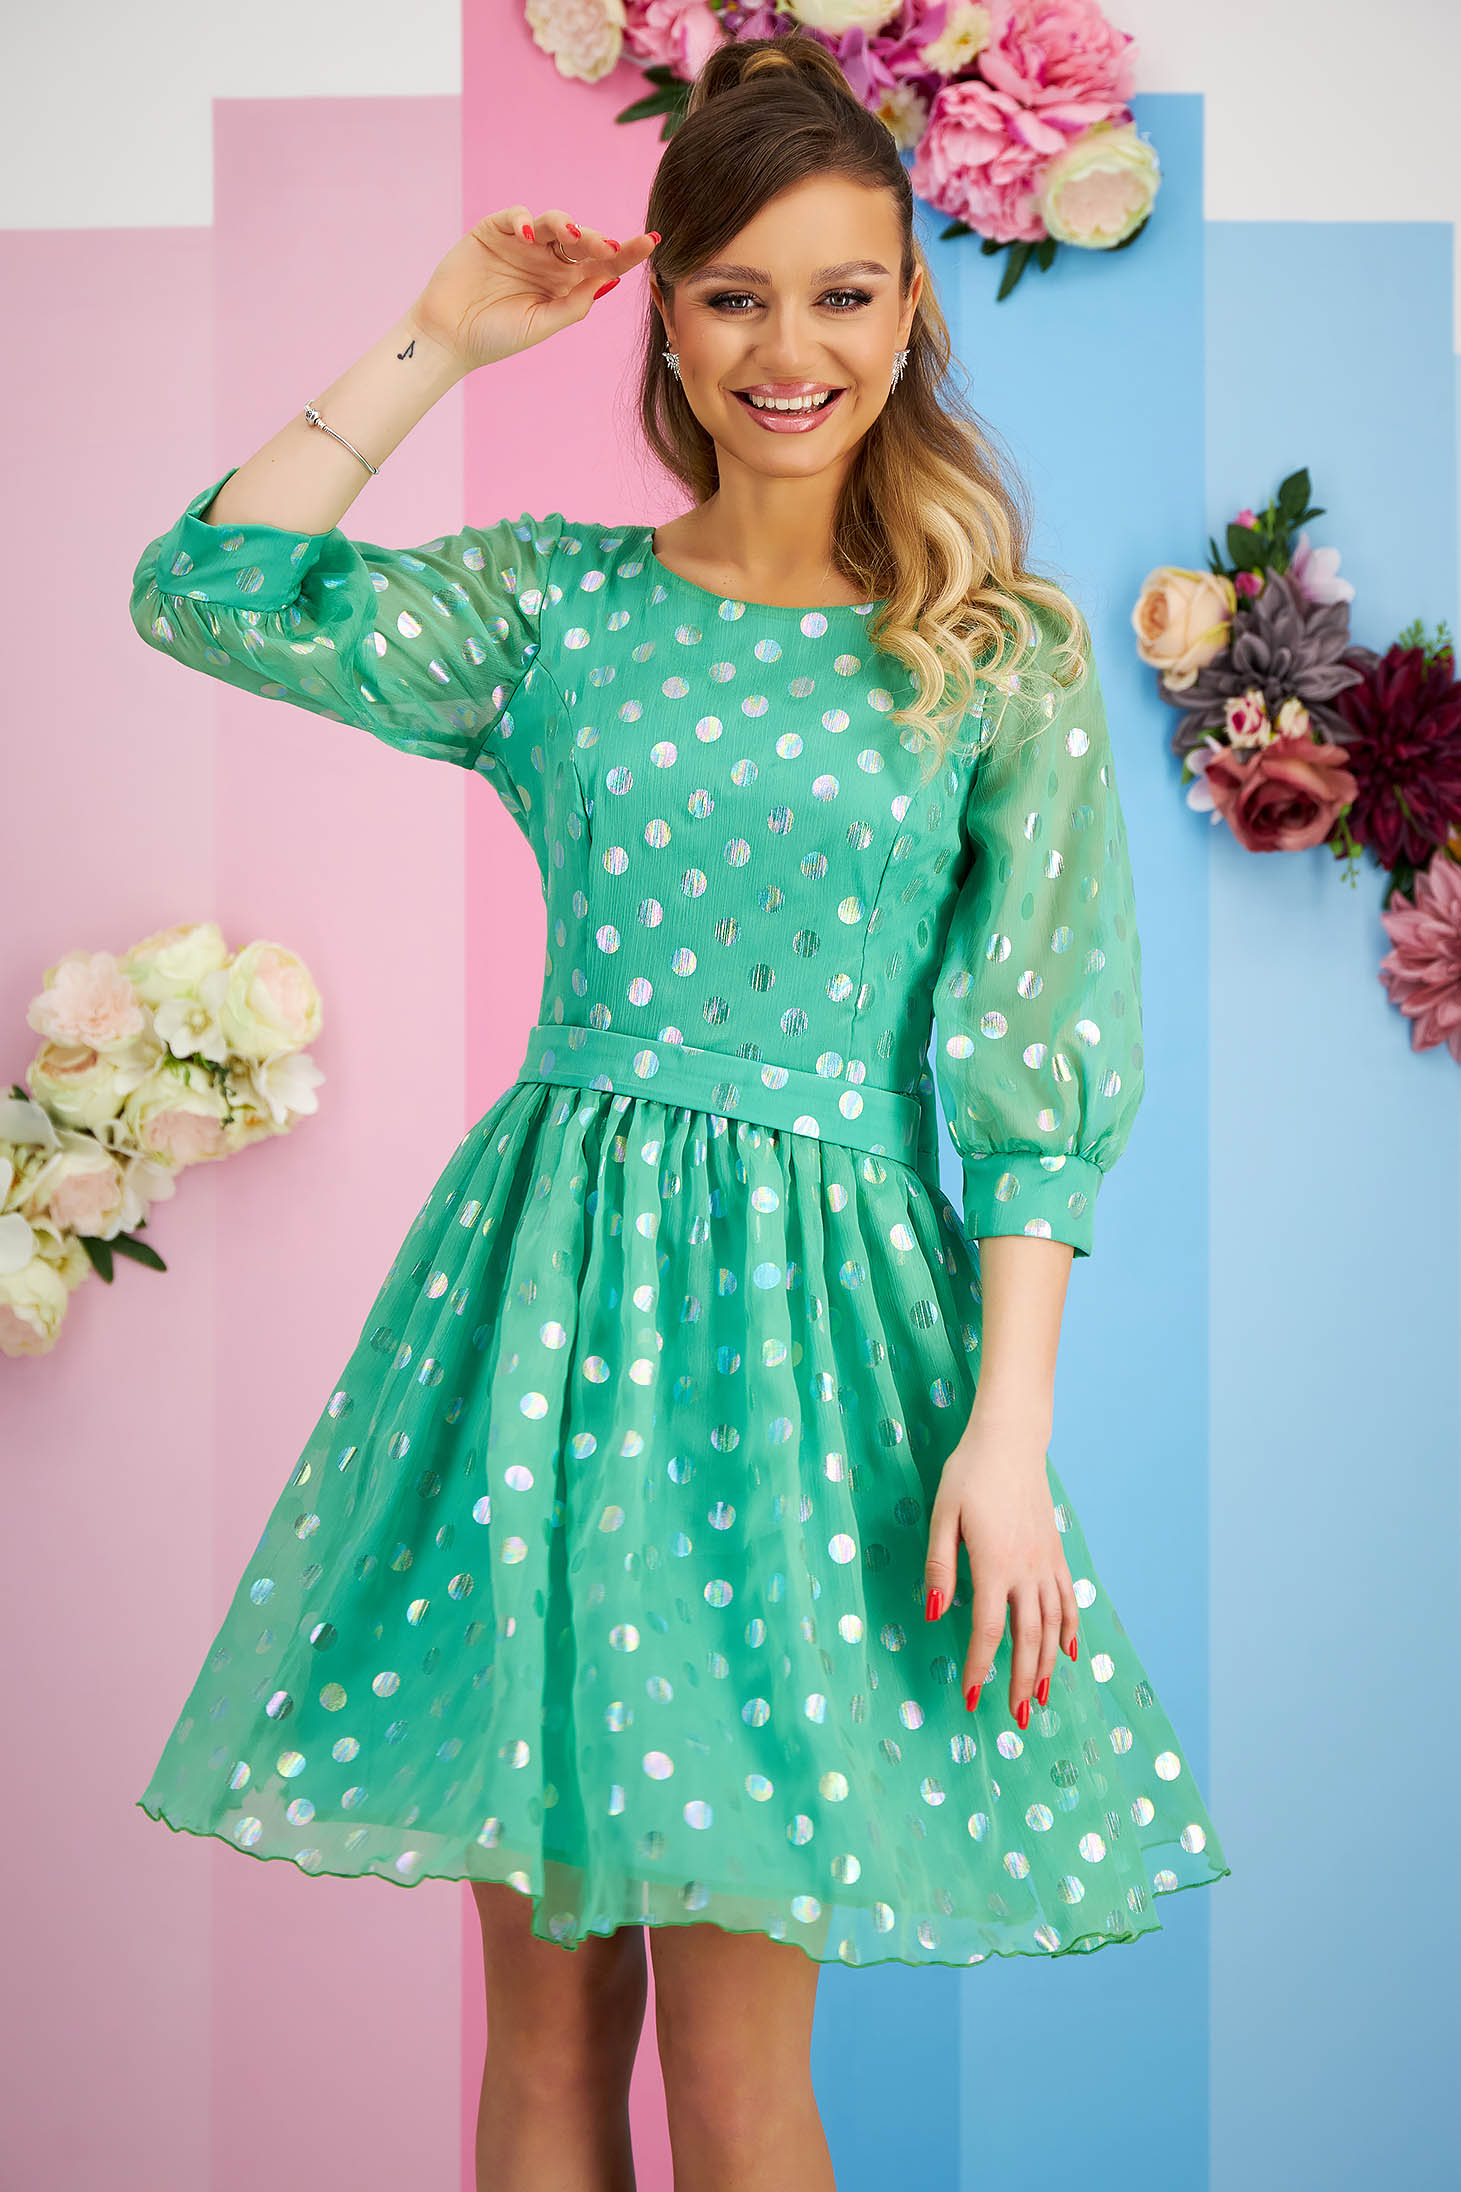 Green veil dress in flared style with polka dots, accessorized with belt and bow - StarShinerS 2 - StarShinerS.com